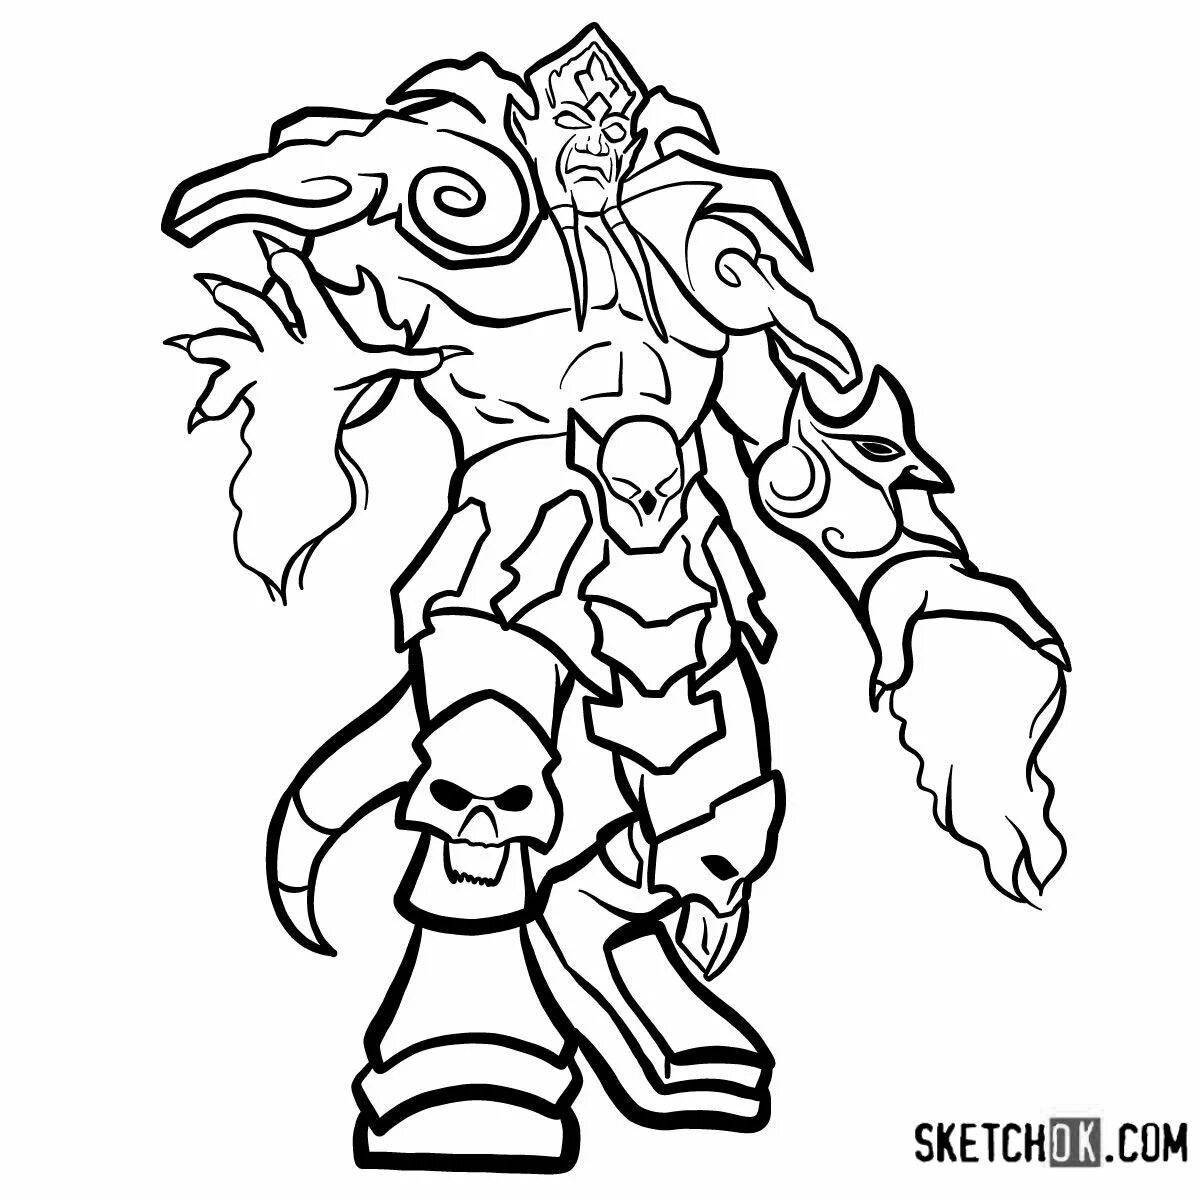 World of warcraft dazzling coloring book